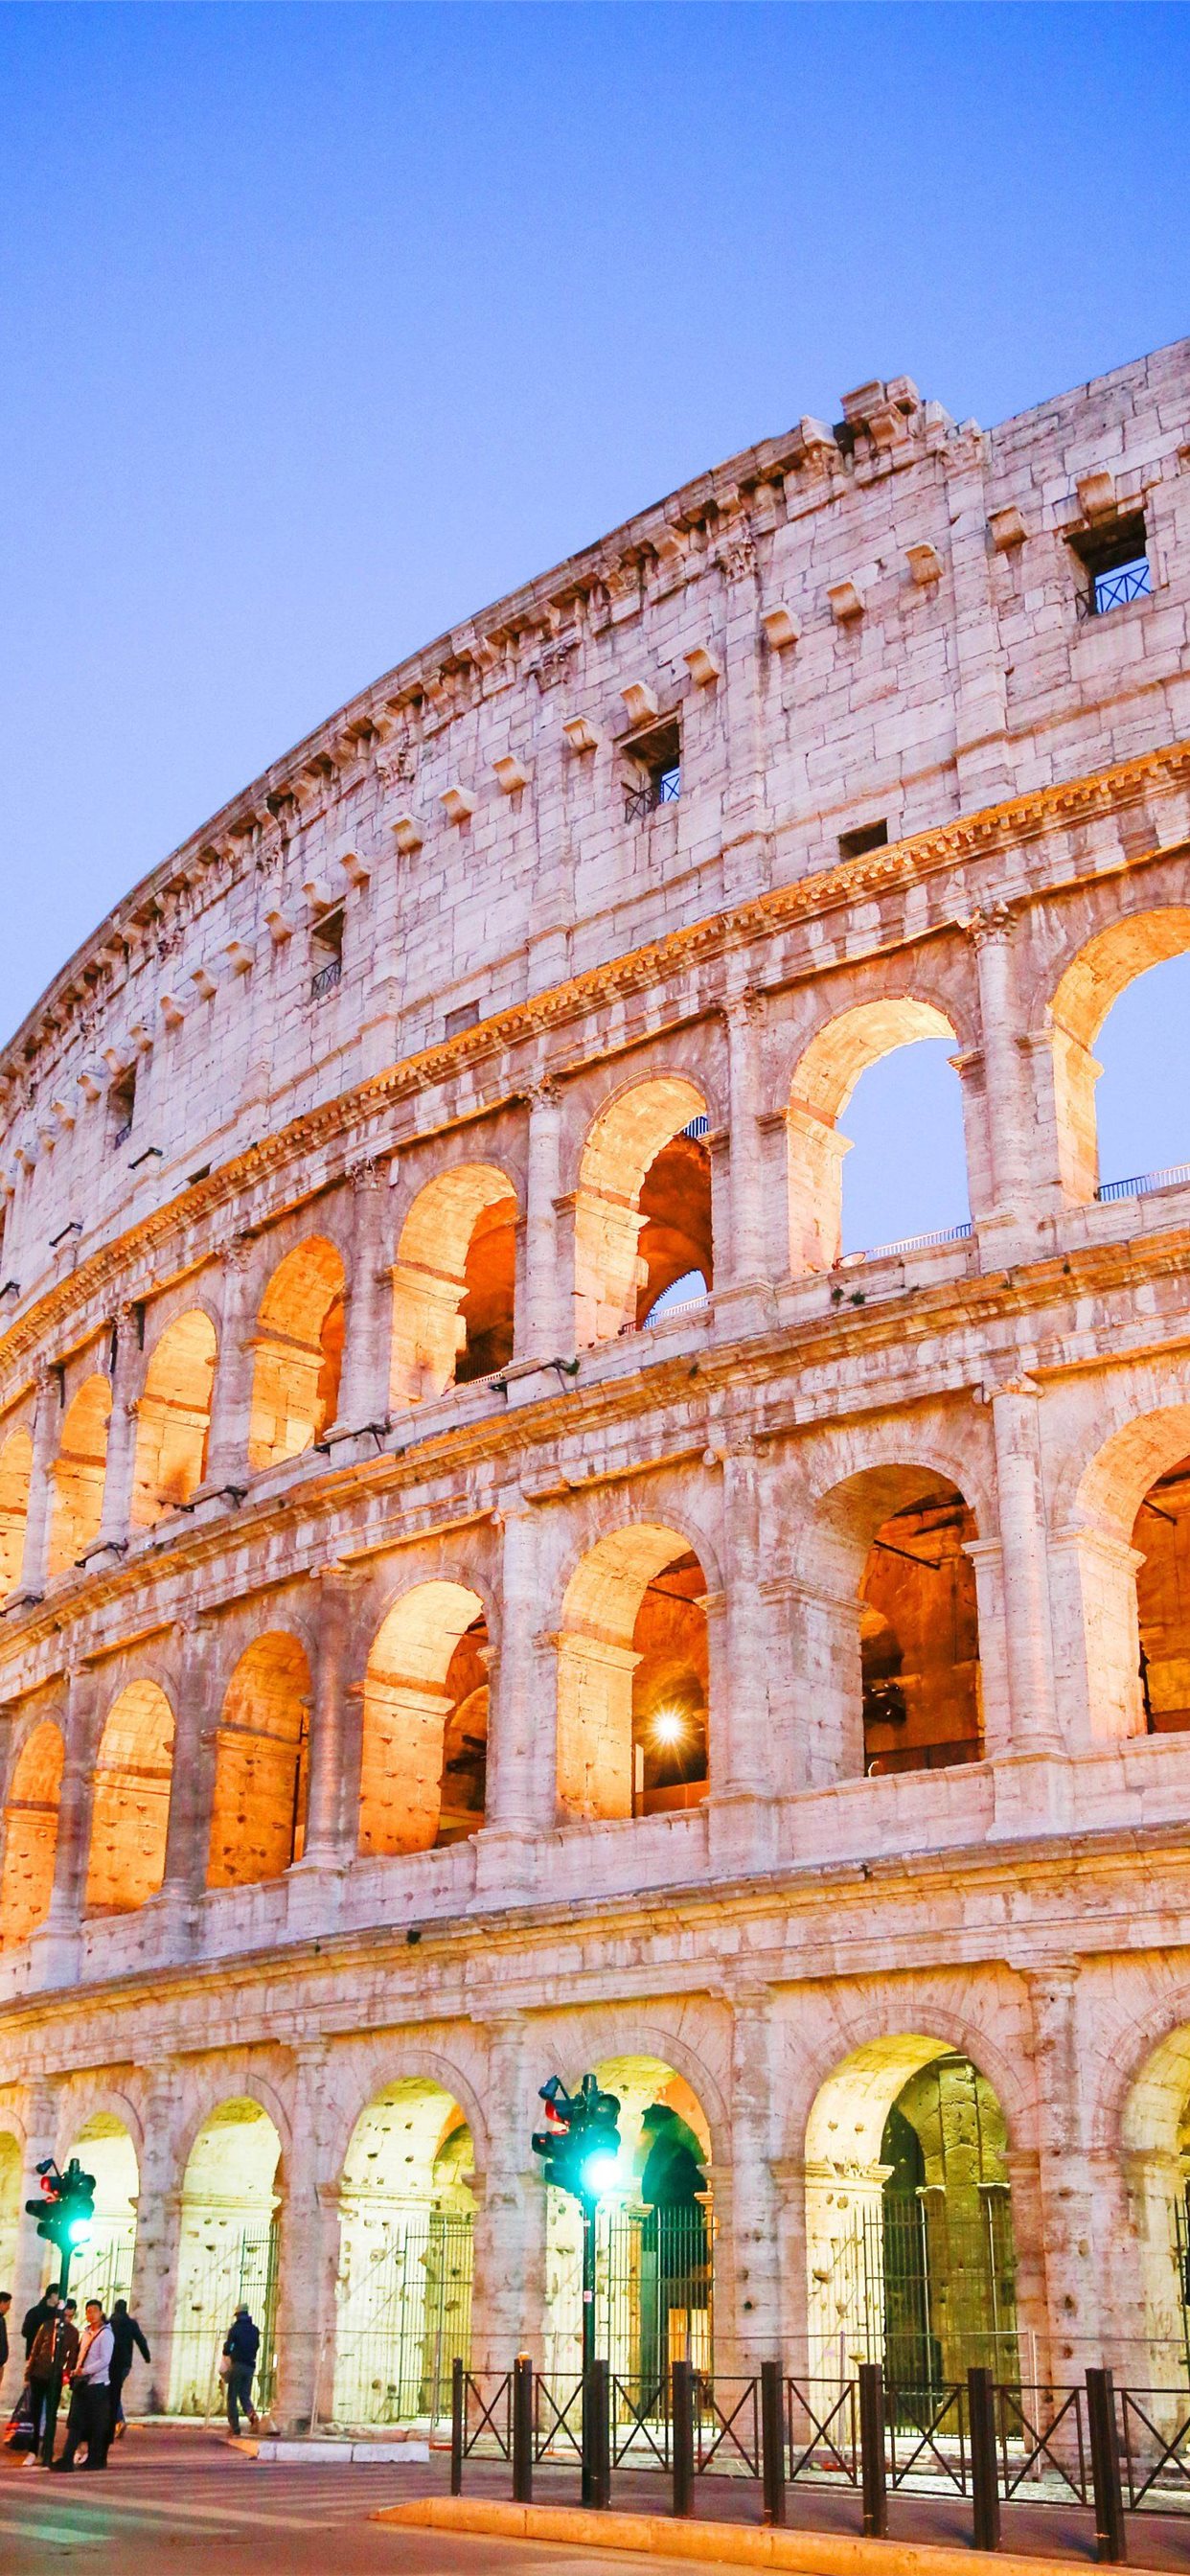 Colosseum of Rome iPhone Wallpaper Free Download